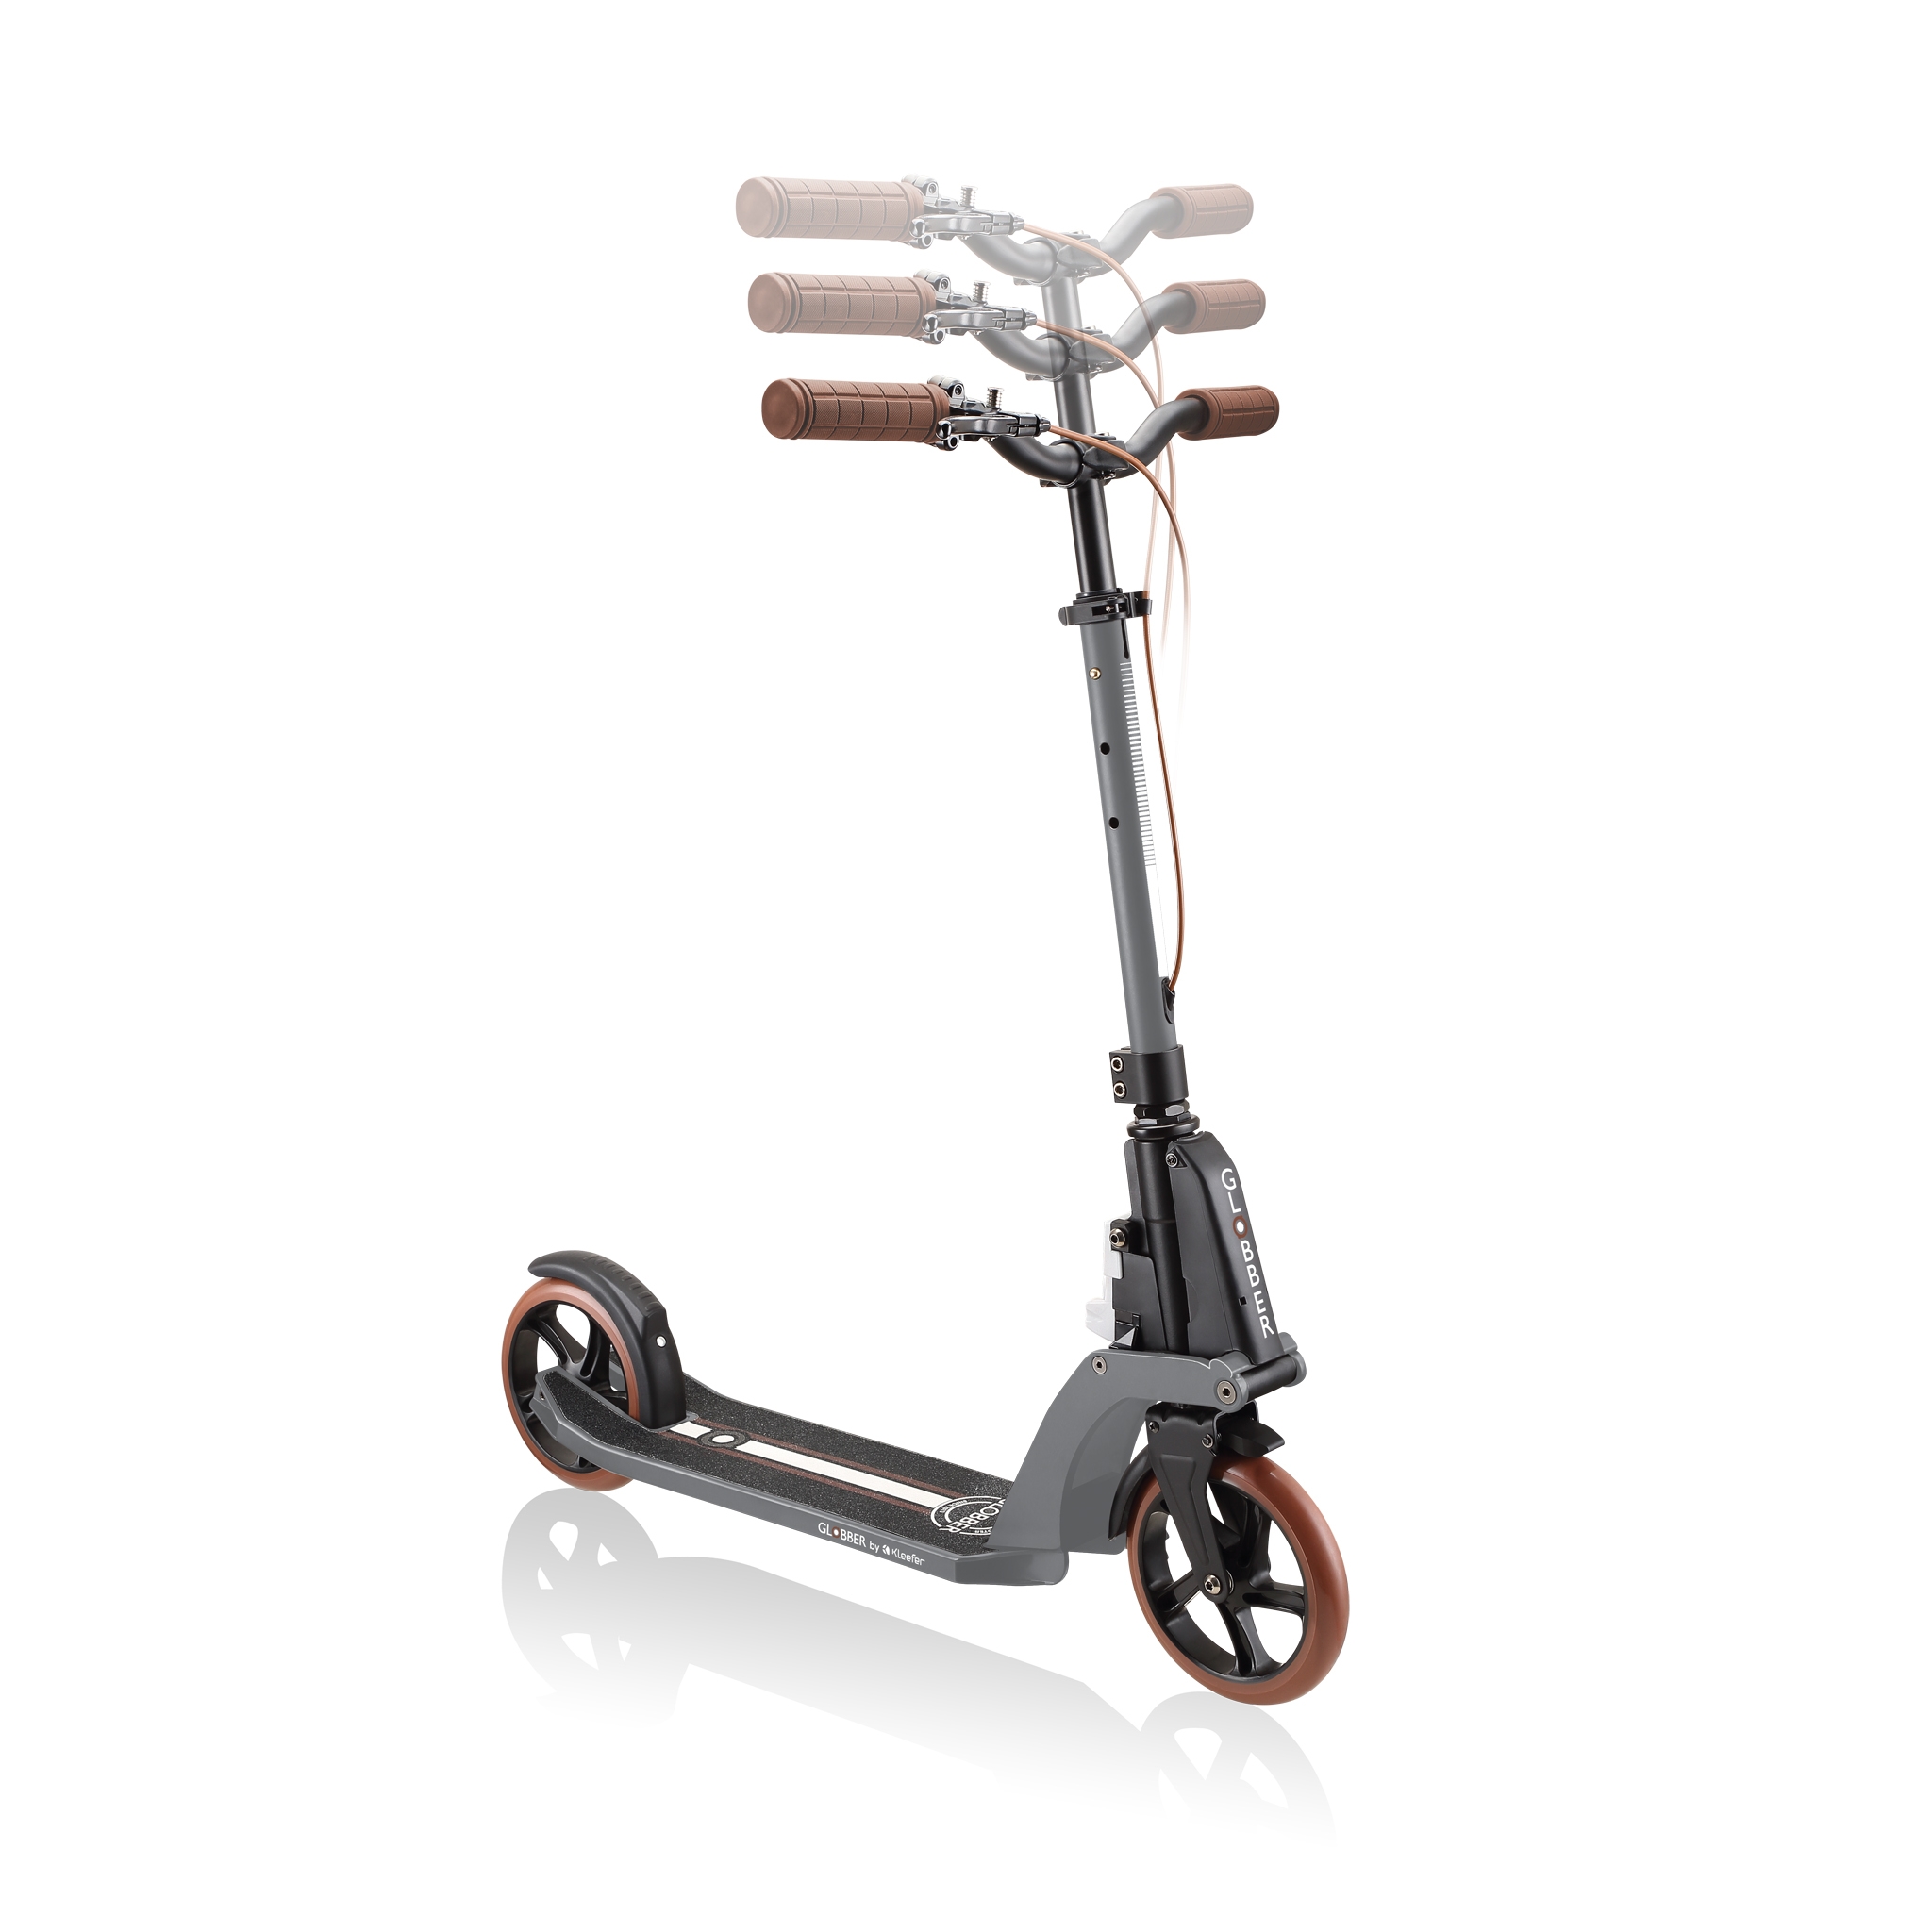 ONE-K-180-PISTON-DELUXE-adjustable-folding-scooter-for-adults 2